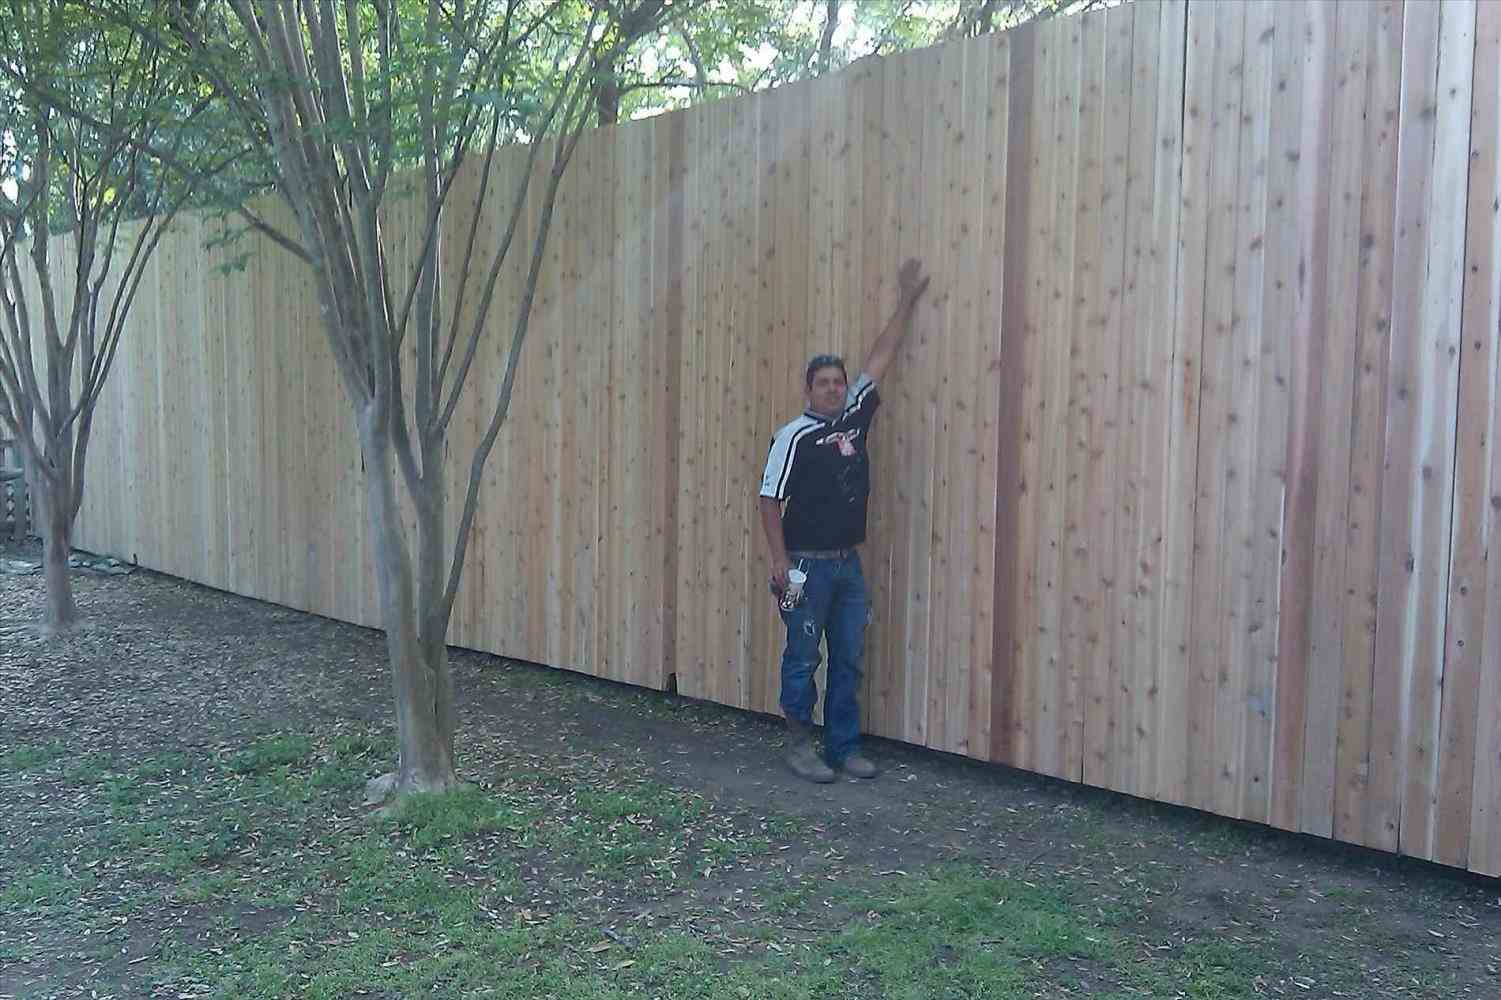 Furniture Ideas Fence Designs To Build A Wood Fence Gate Gates And intended for measurements 1501 X 1000